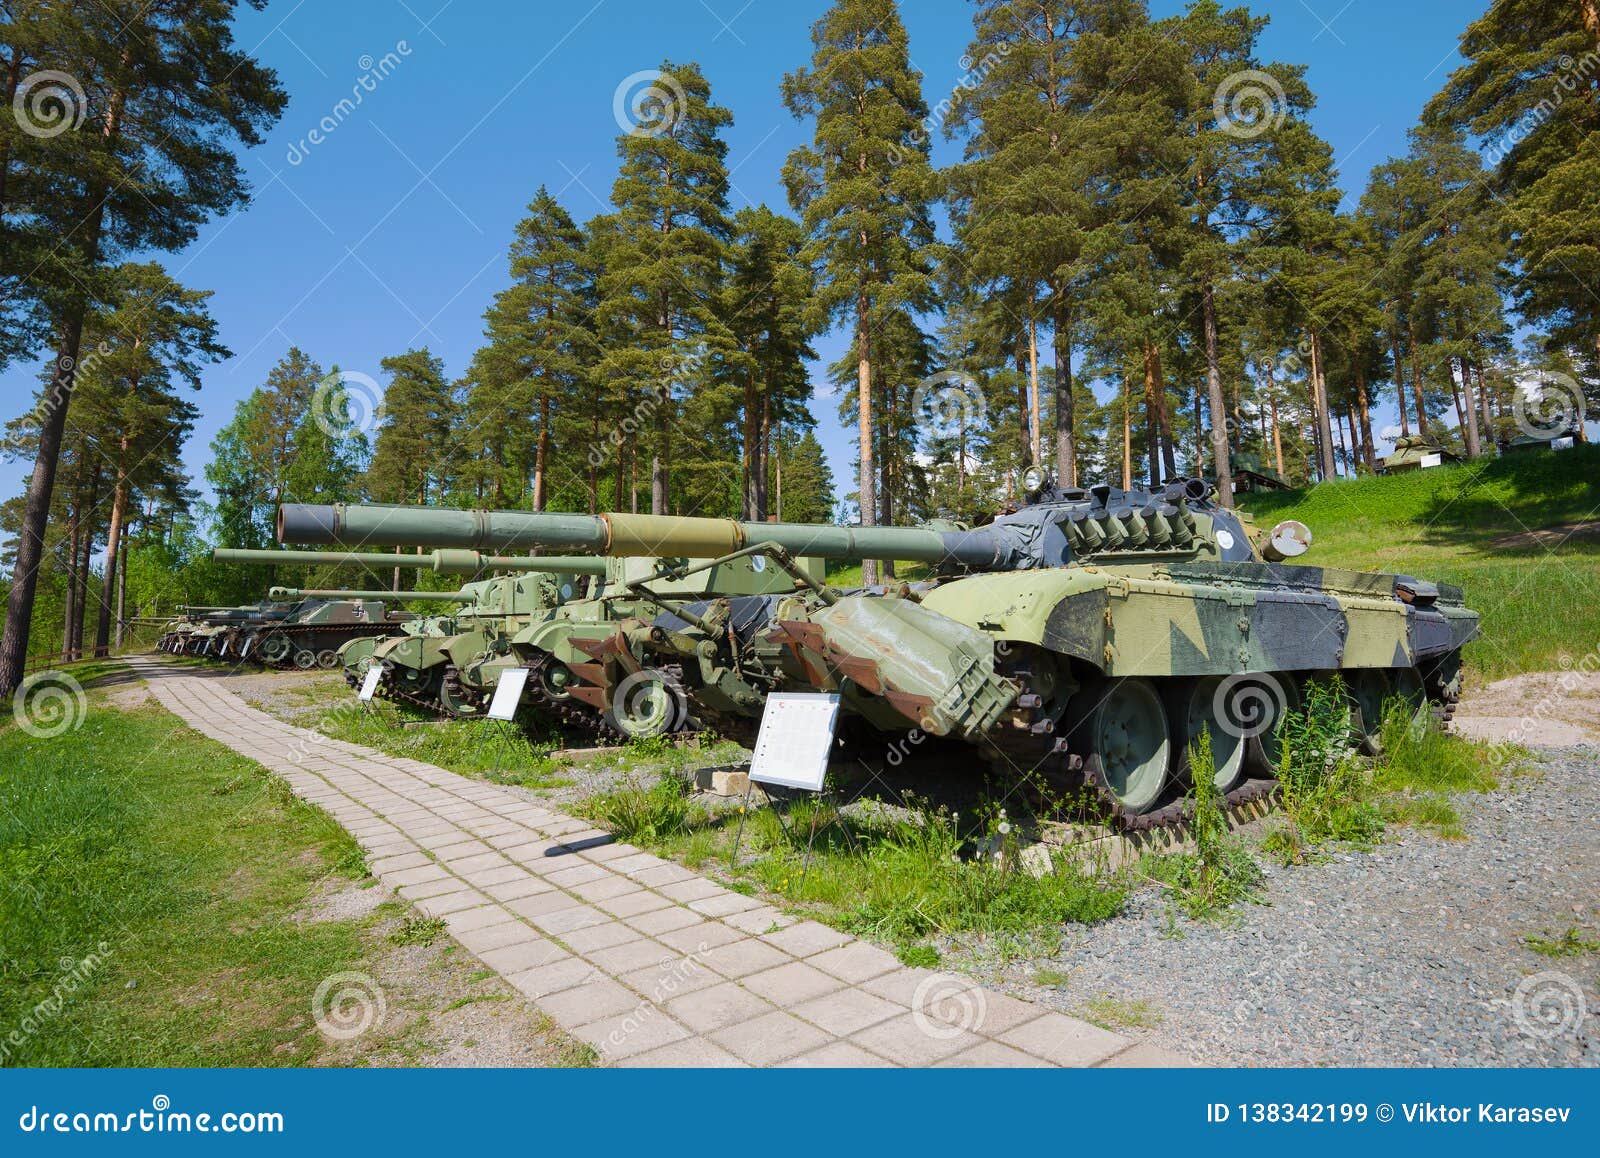 On The Alleys Of The Parola Tank Museum View Of The Soviet Tank T 72m1 Finland Editorial Stock Image Image Of Finland Transport